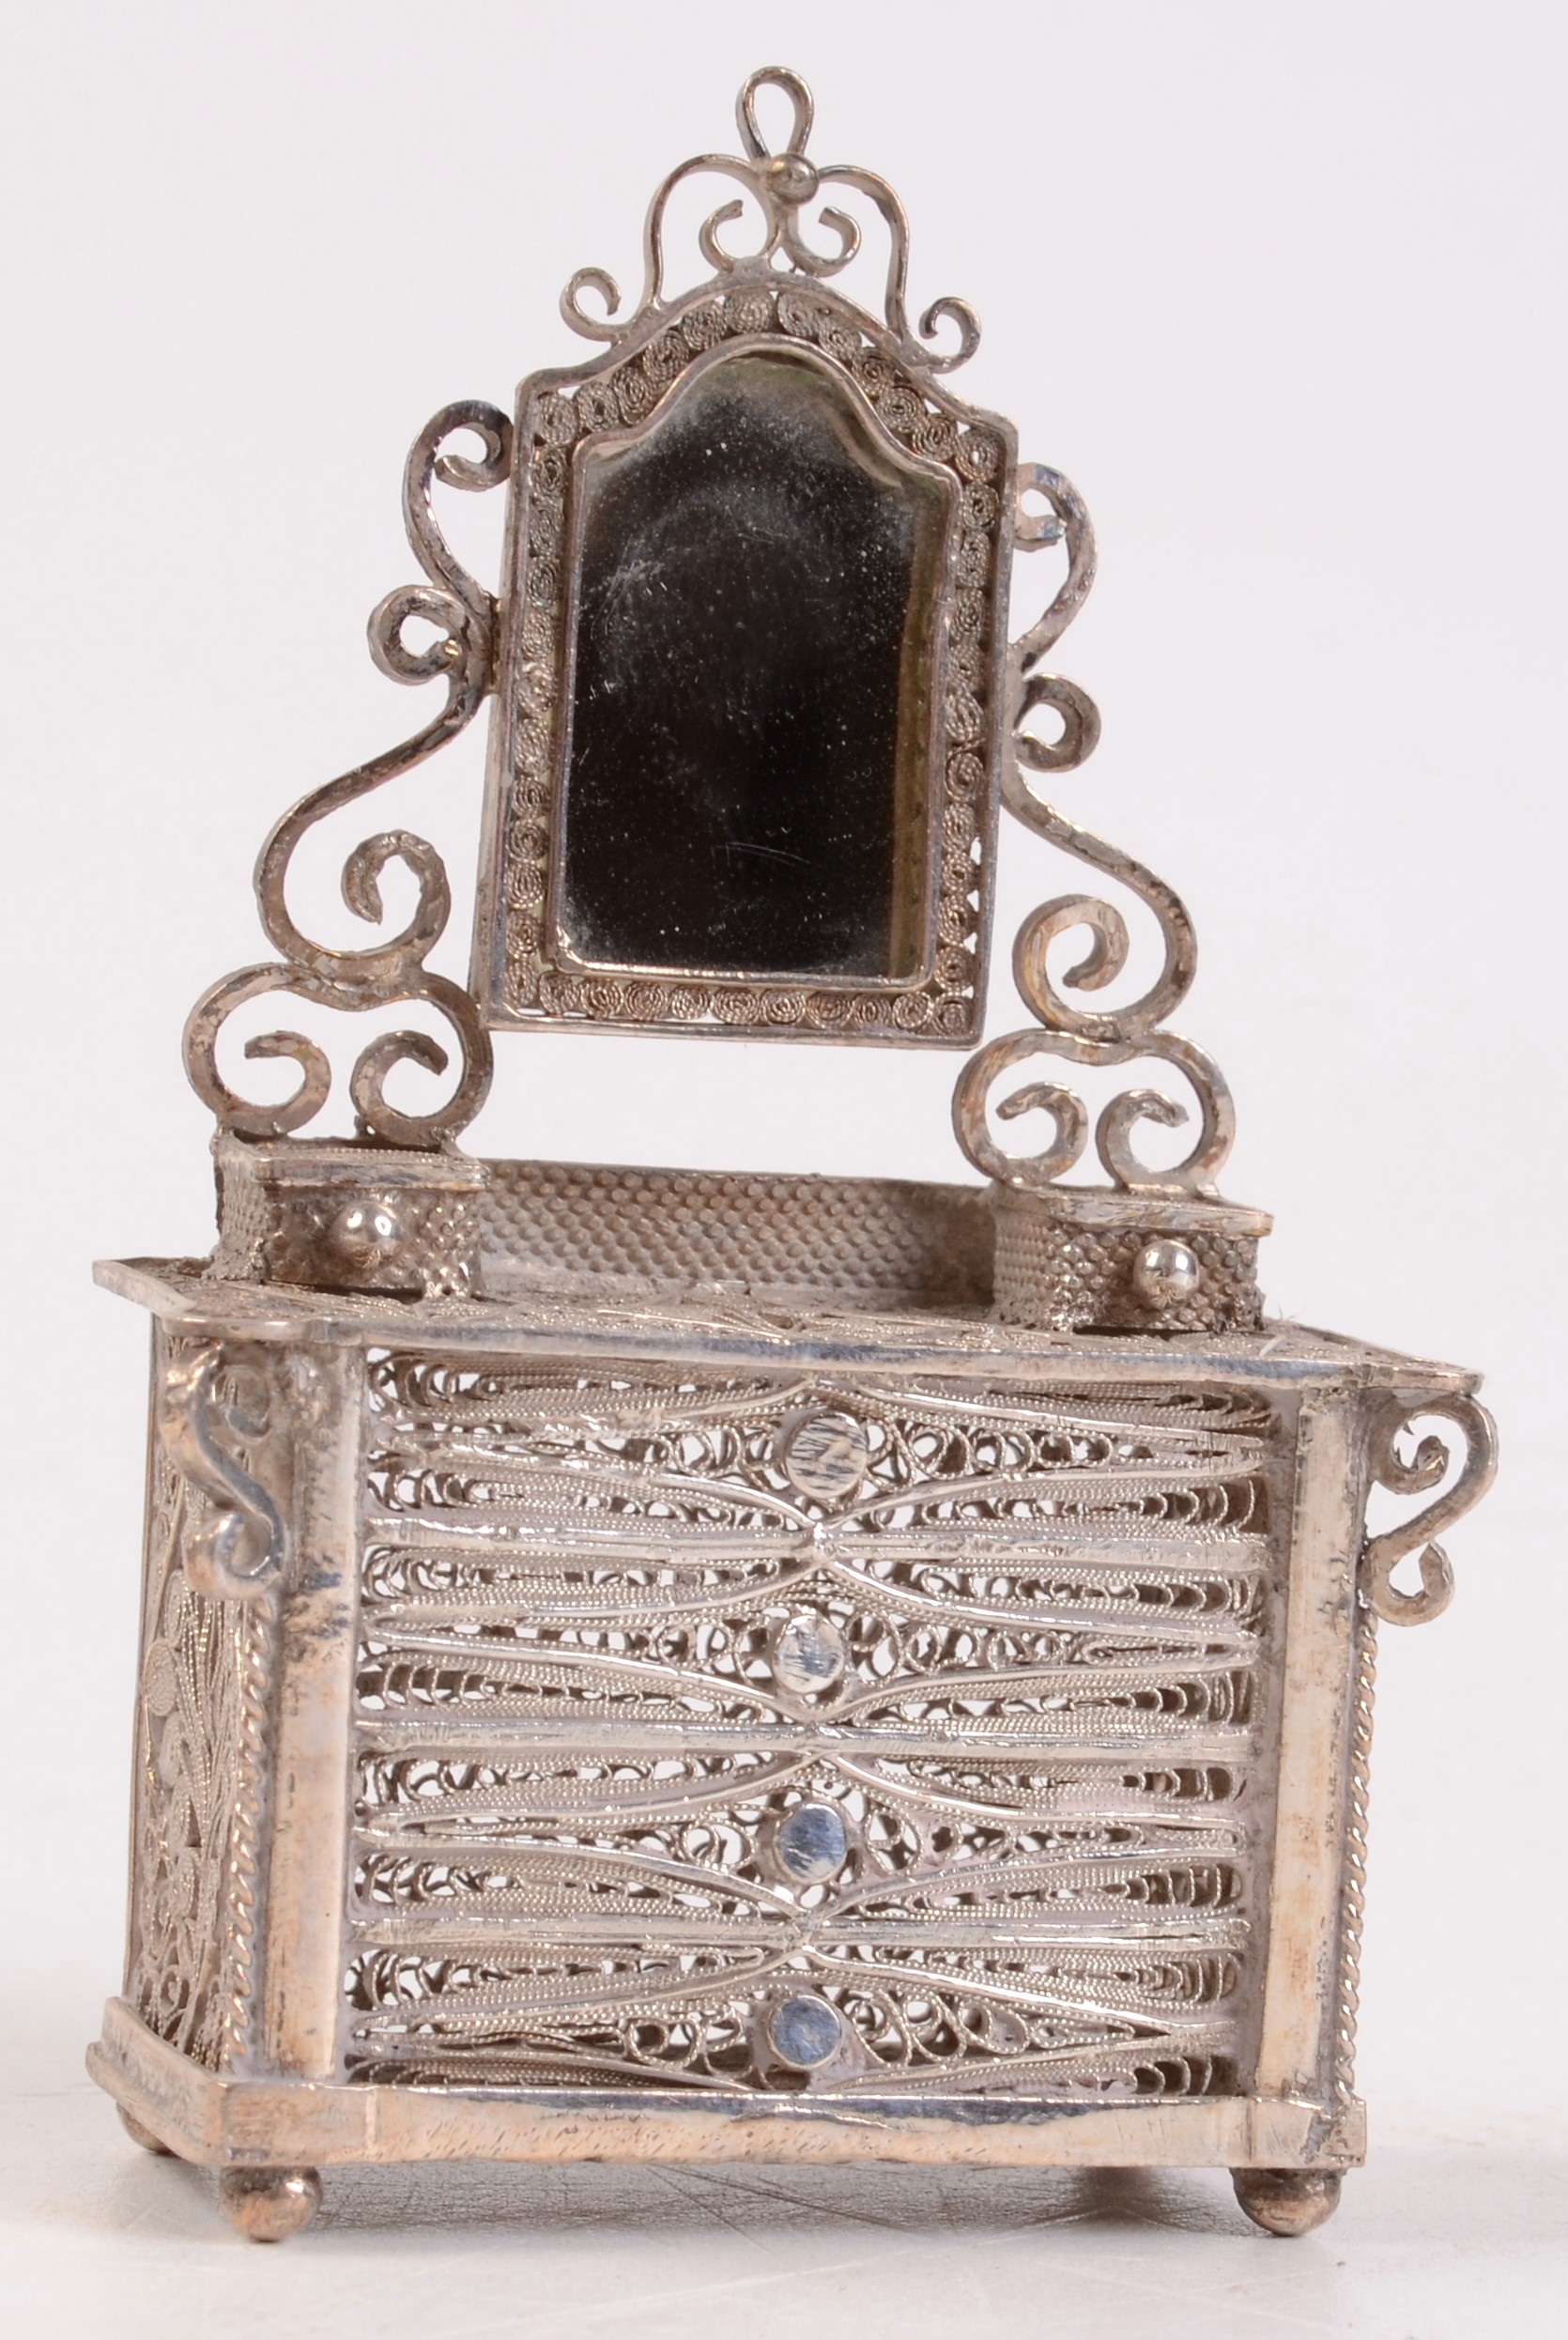 A 19th century silver filigree dressing chest.